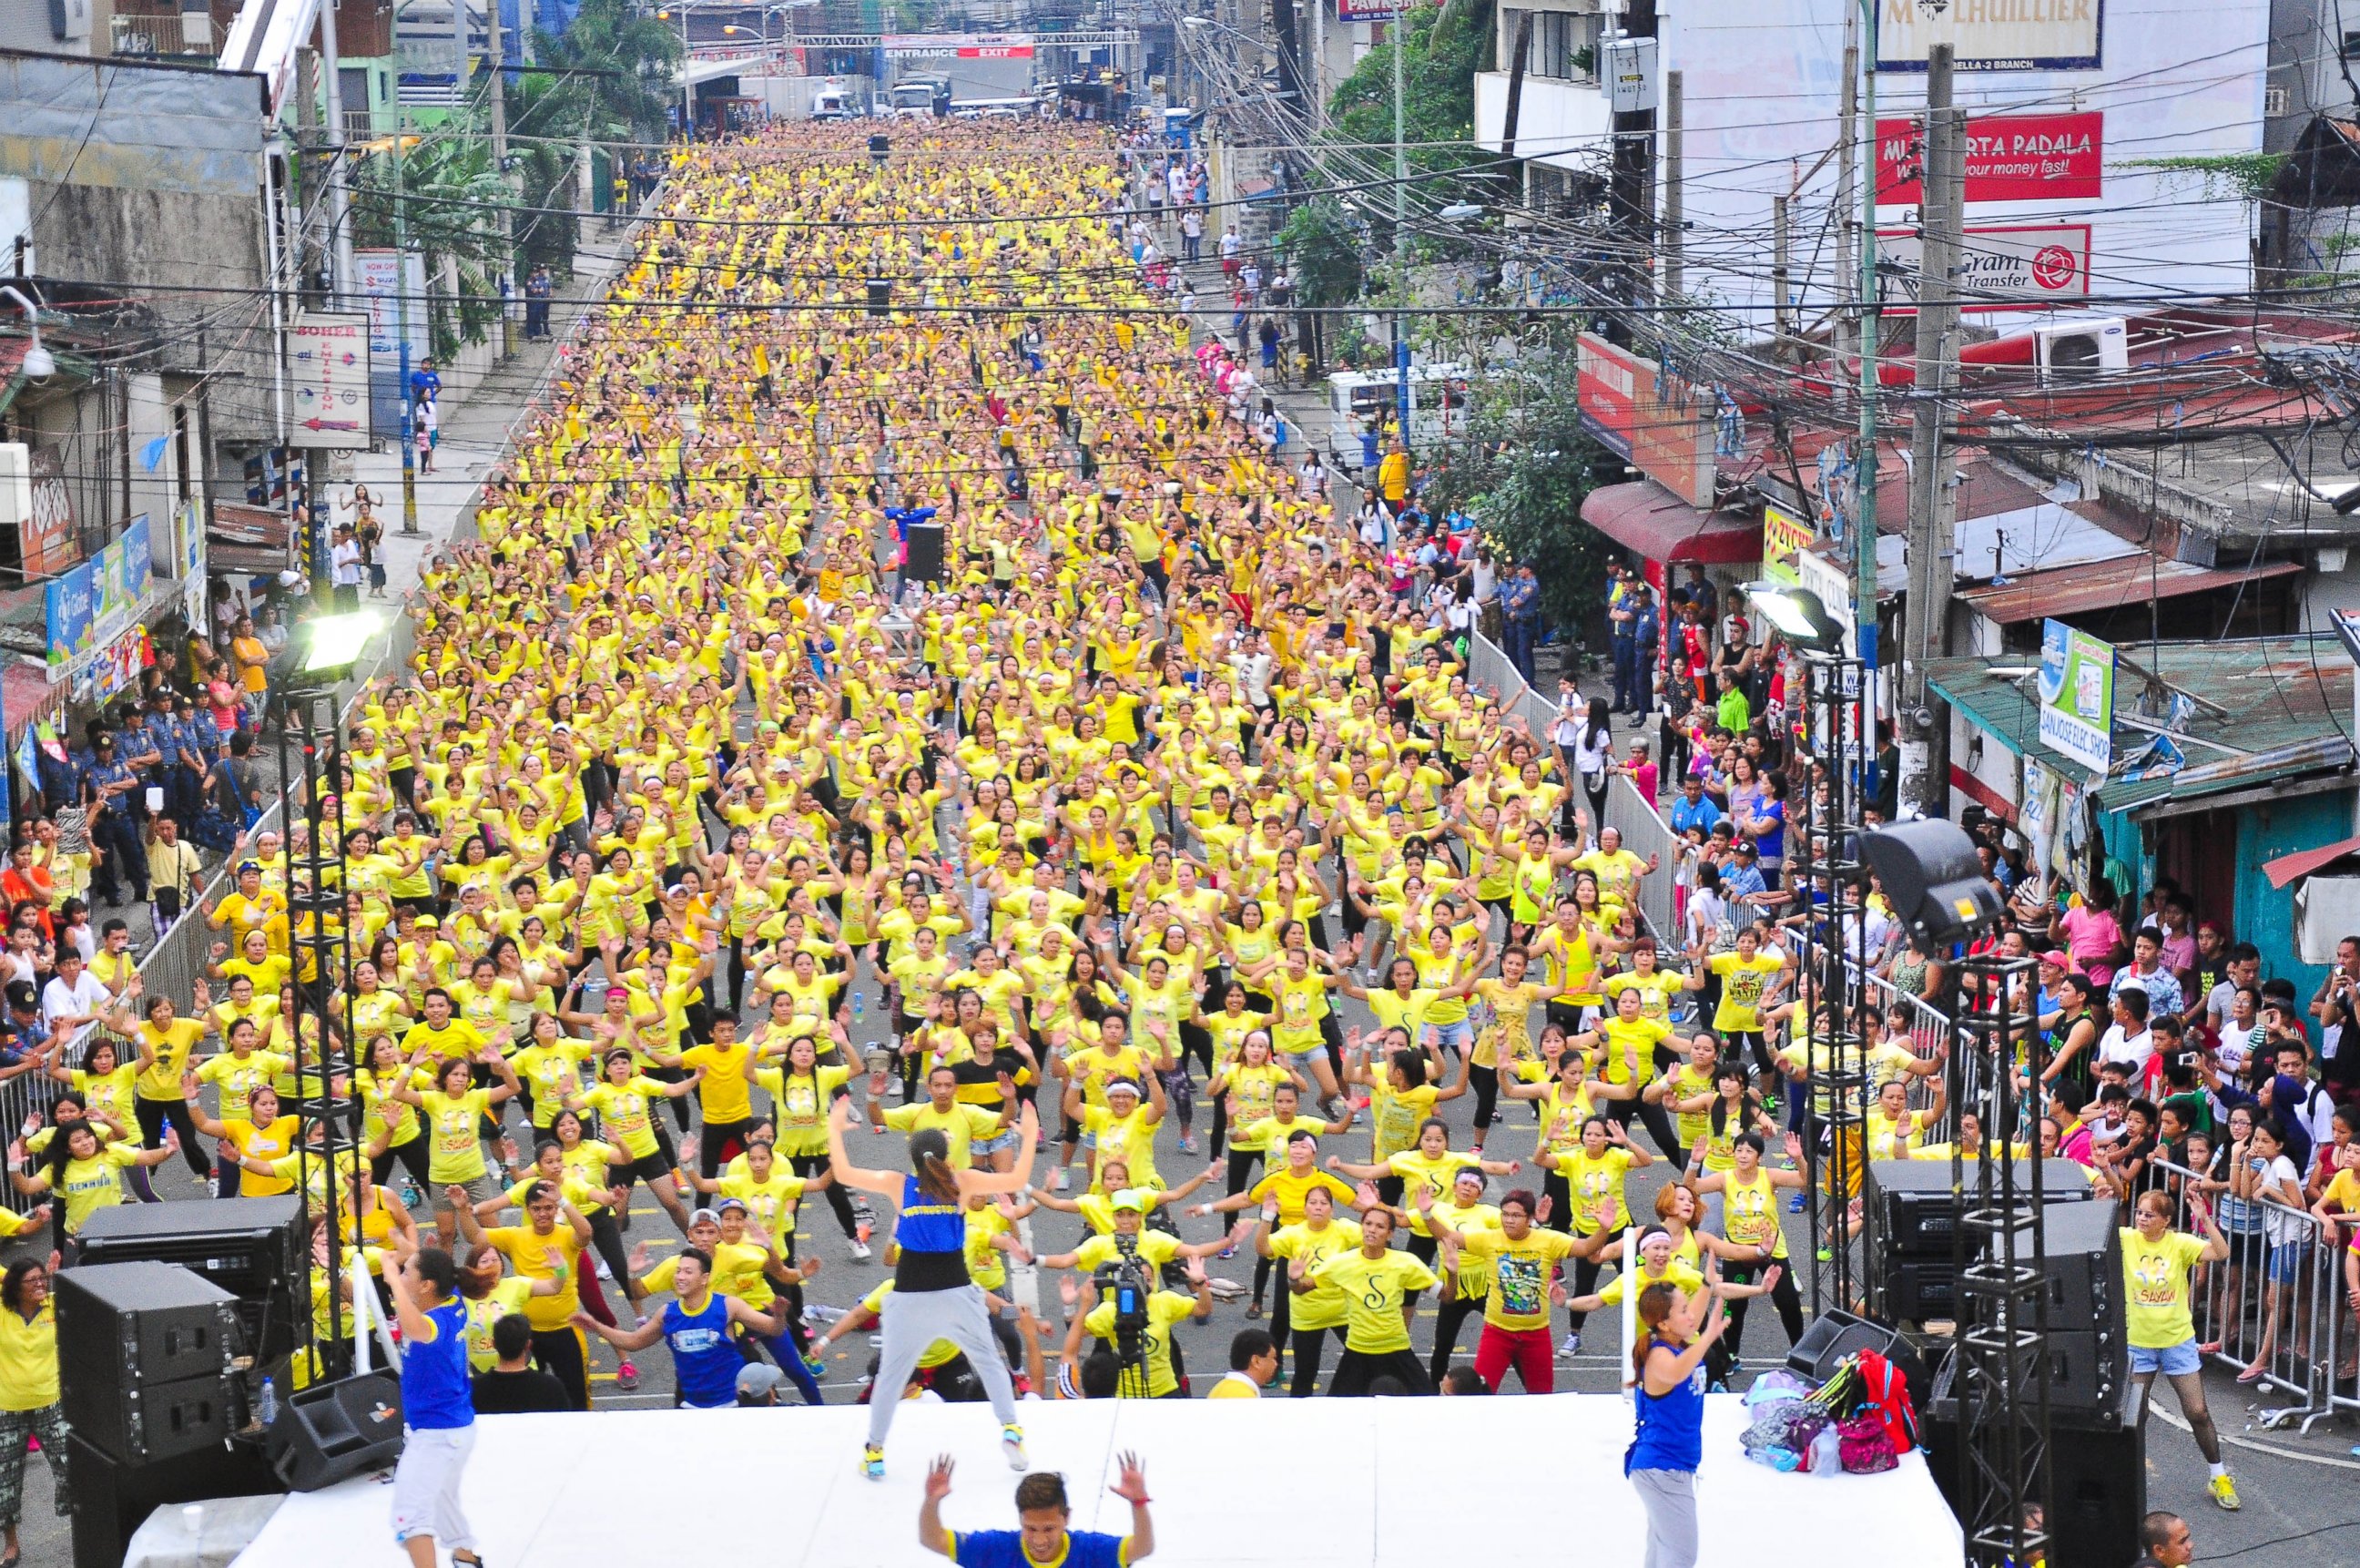 PHOTO: The largest Zumba class consisted of 12,975 people.